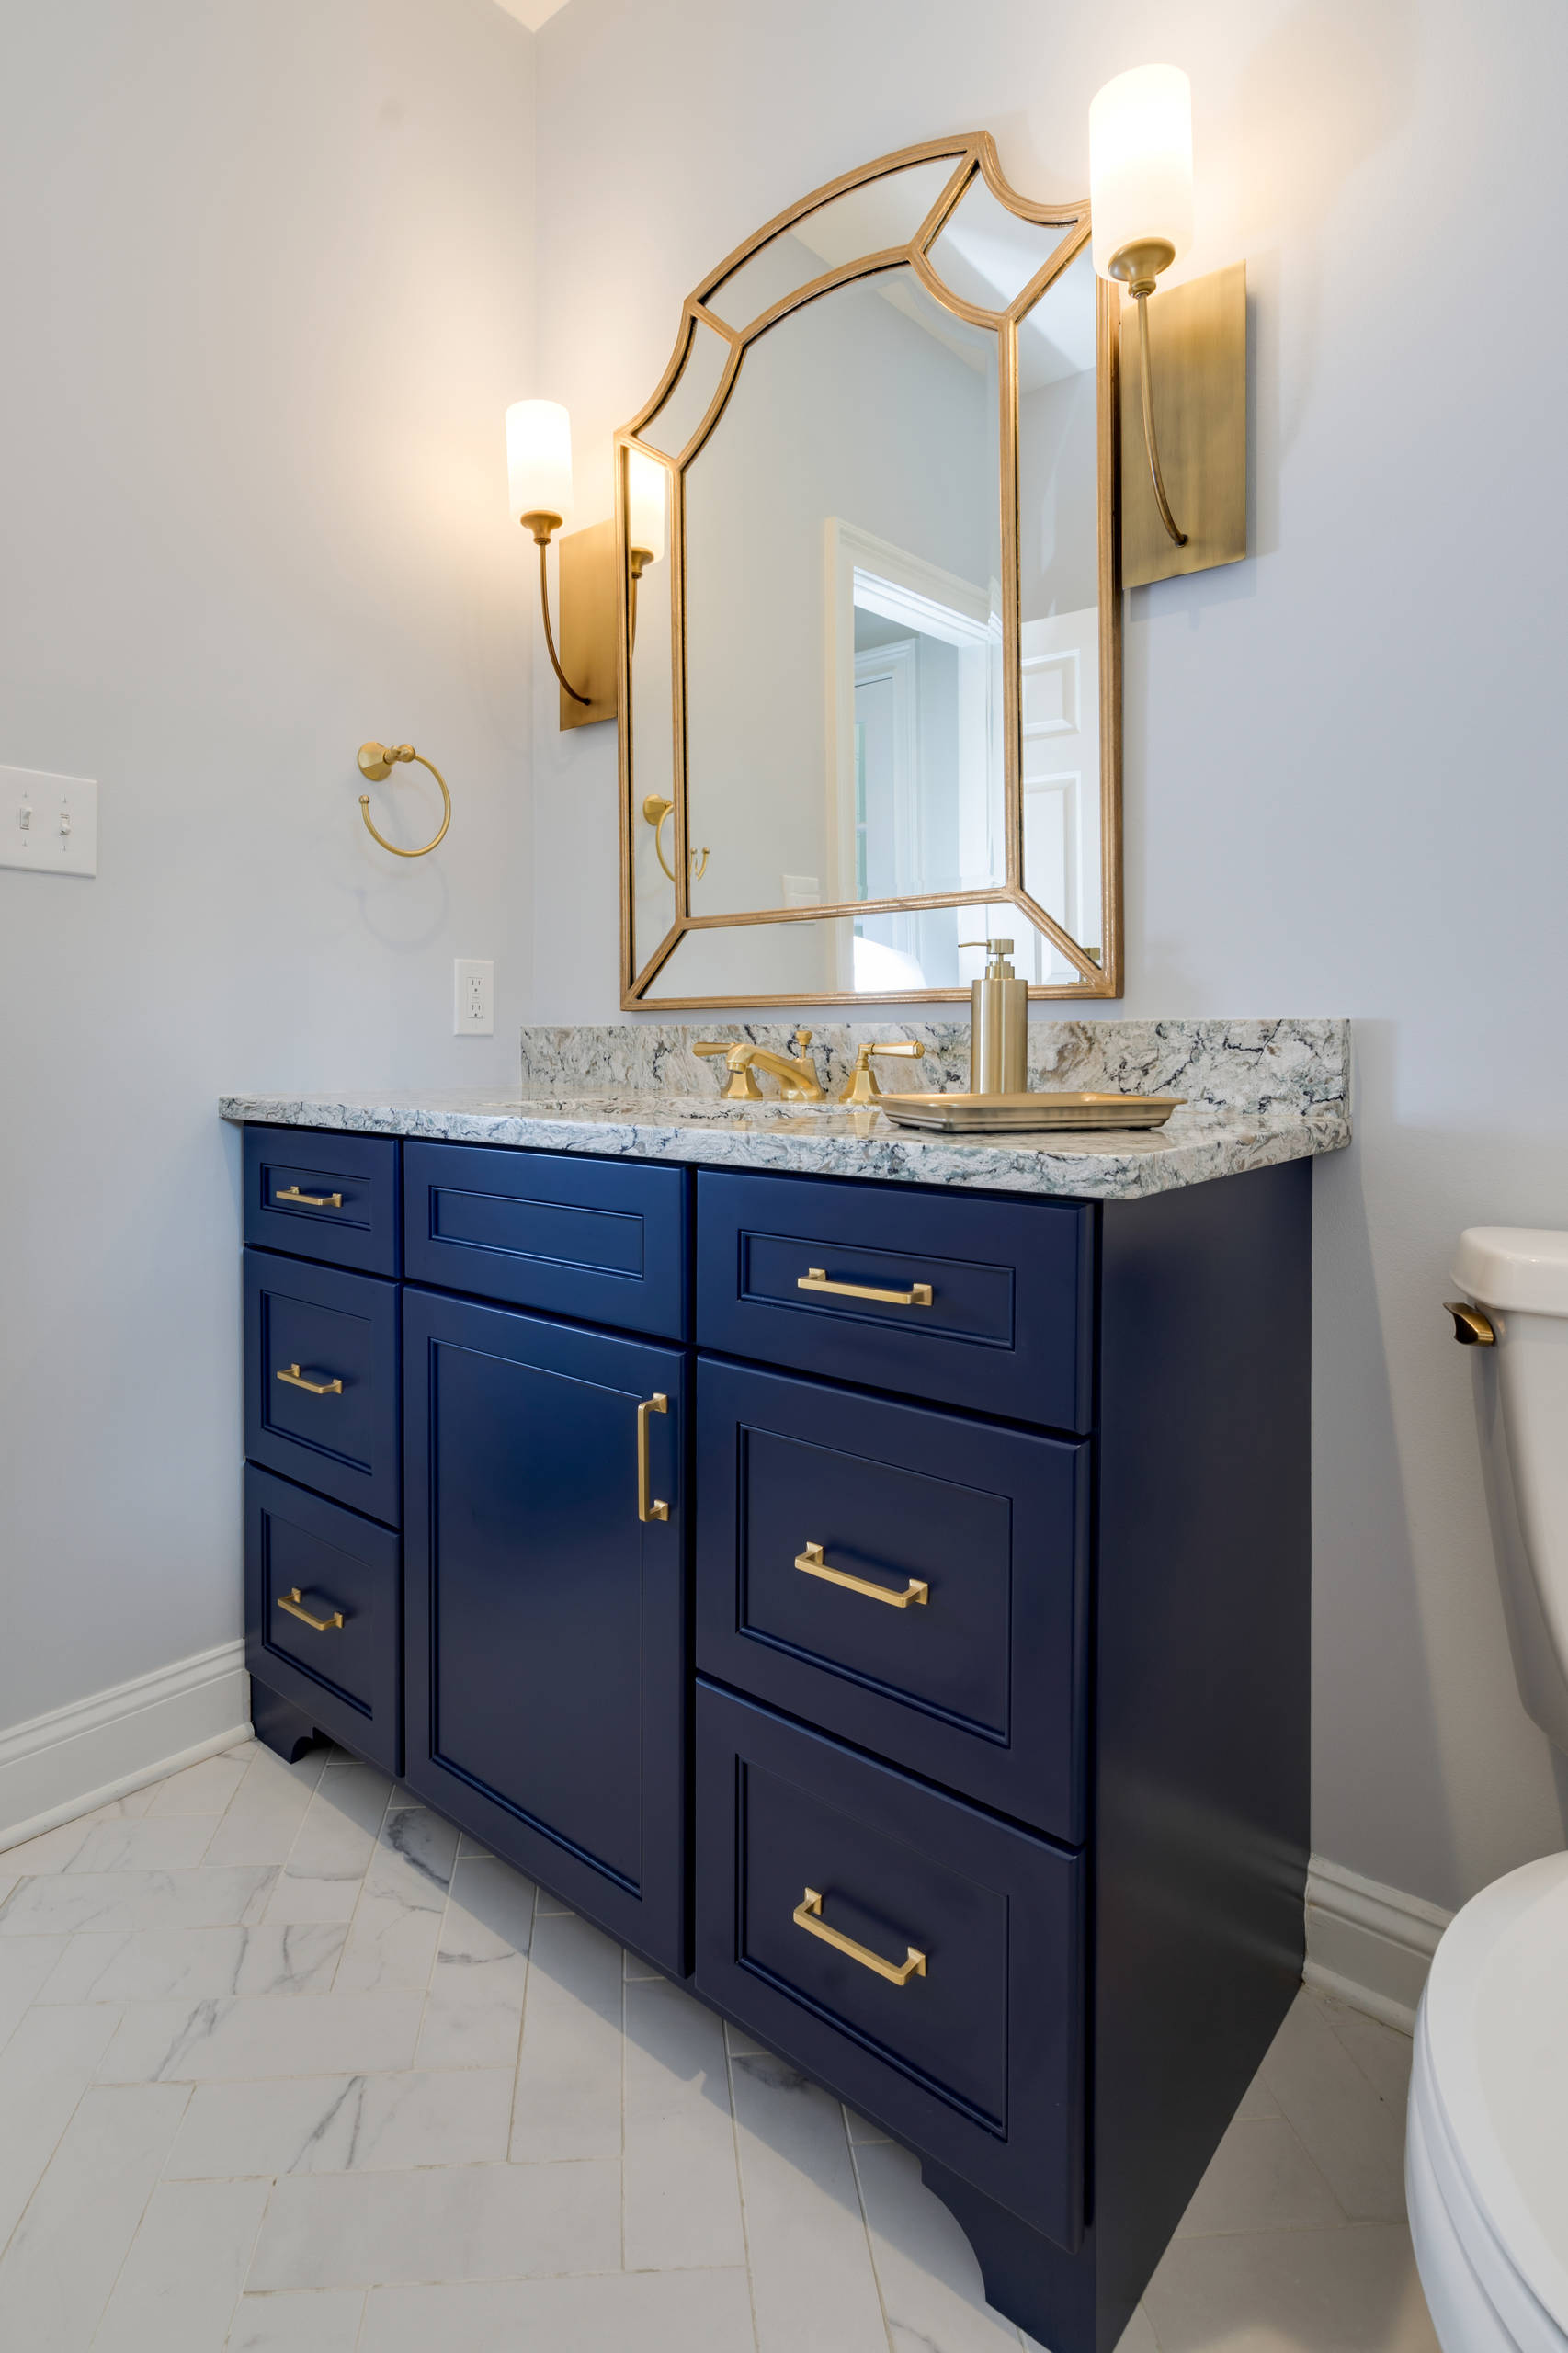 https://st.hzcdn.com/simgs/pictures/powder-rooms/powder-room-with-color-newtown-lang-s-kitchen-and-bath-img~4b61d5480a7d9b16_14-3439-1-934ec51.jpg